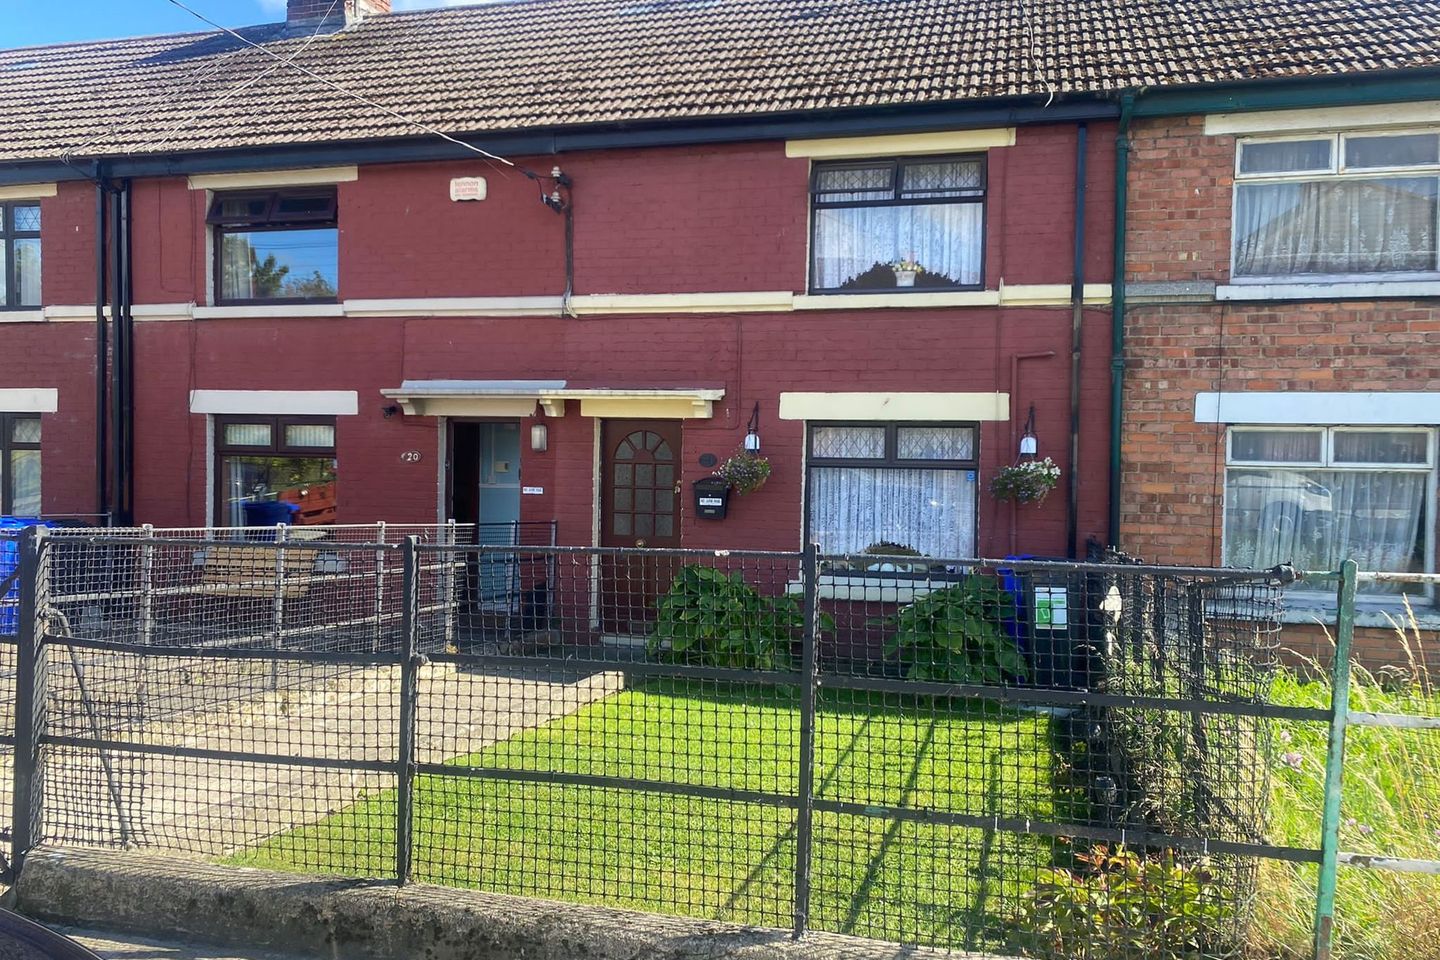 21 Pearse Park, Drogheda, Co. Louth